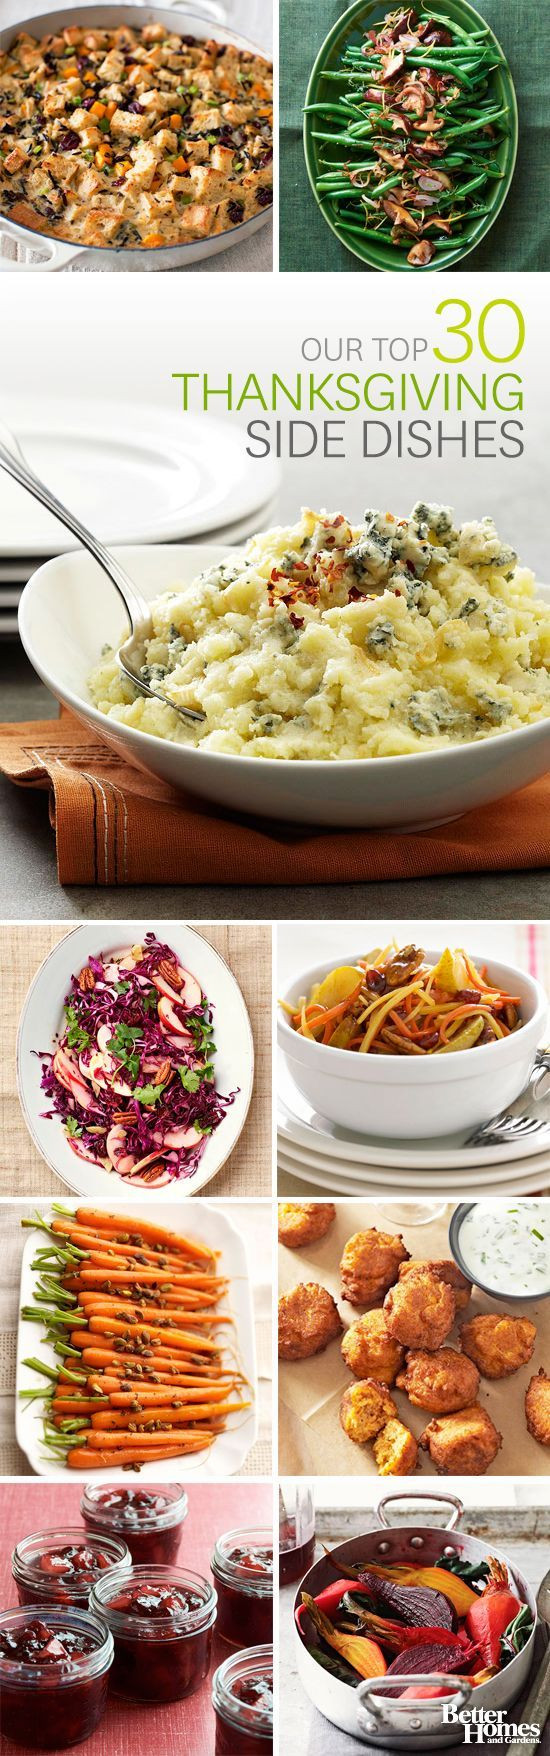 Most Popular Thanksgiving Side Dishes
 Make Ahead Holiday Side Dishes